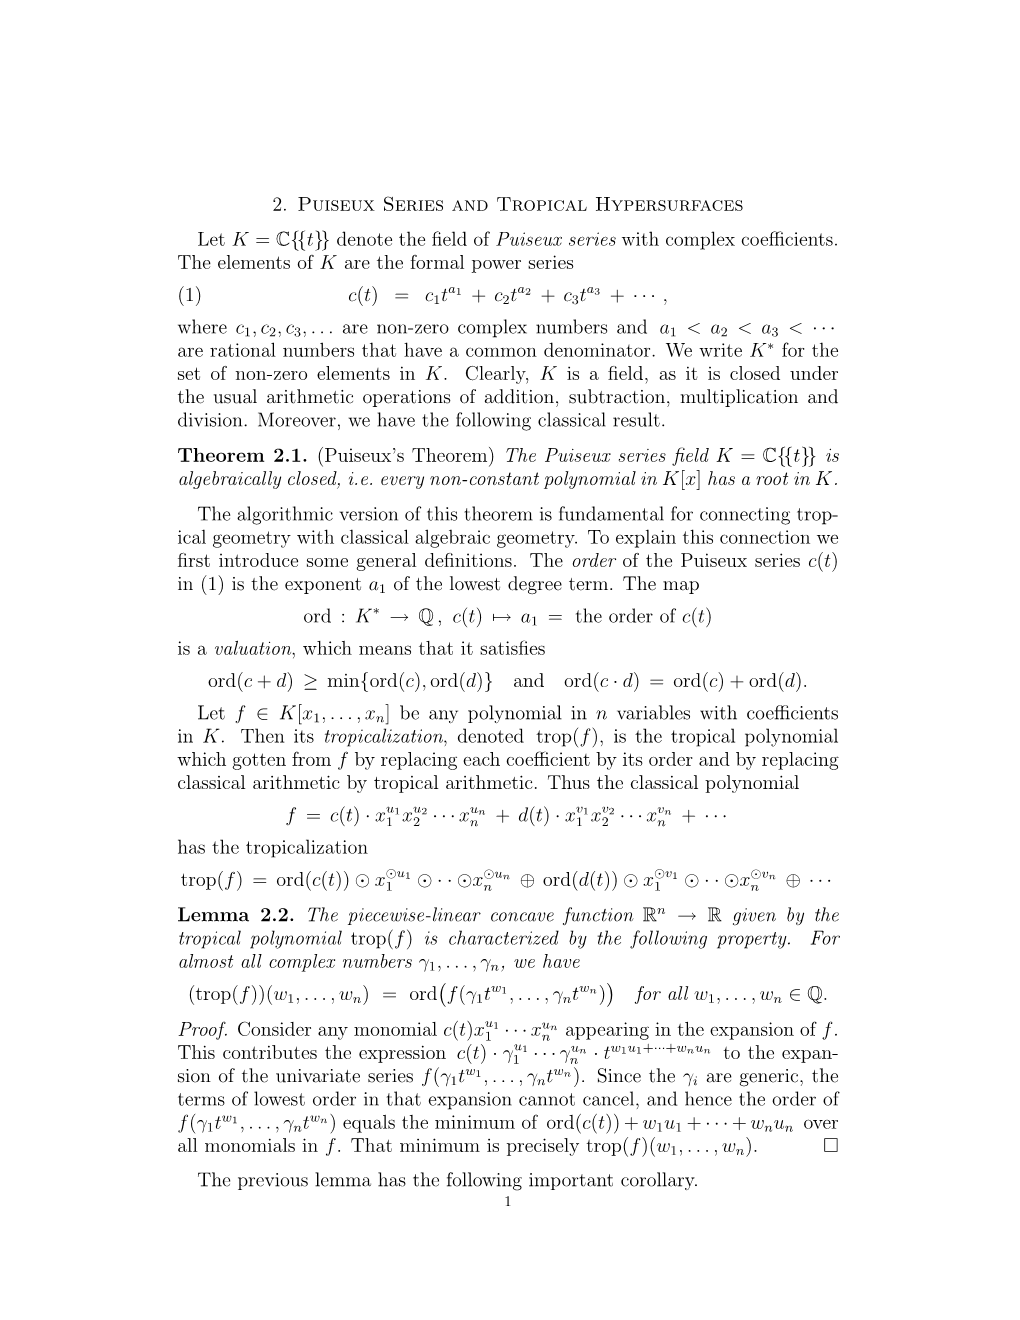 2. Puiseux Series and Tropical Hypersurfaces Let K = C{{T}} Denote the ﬁeld of Puiseux Series with Complex Coeﬃcients